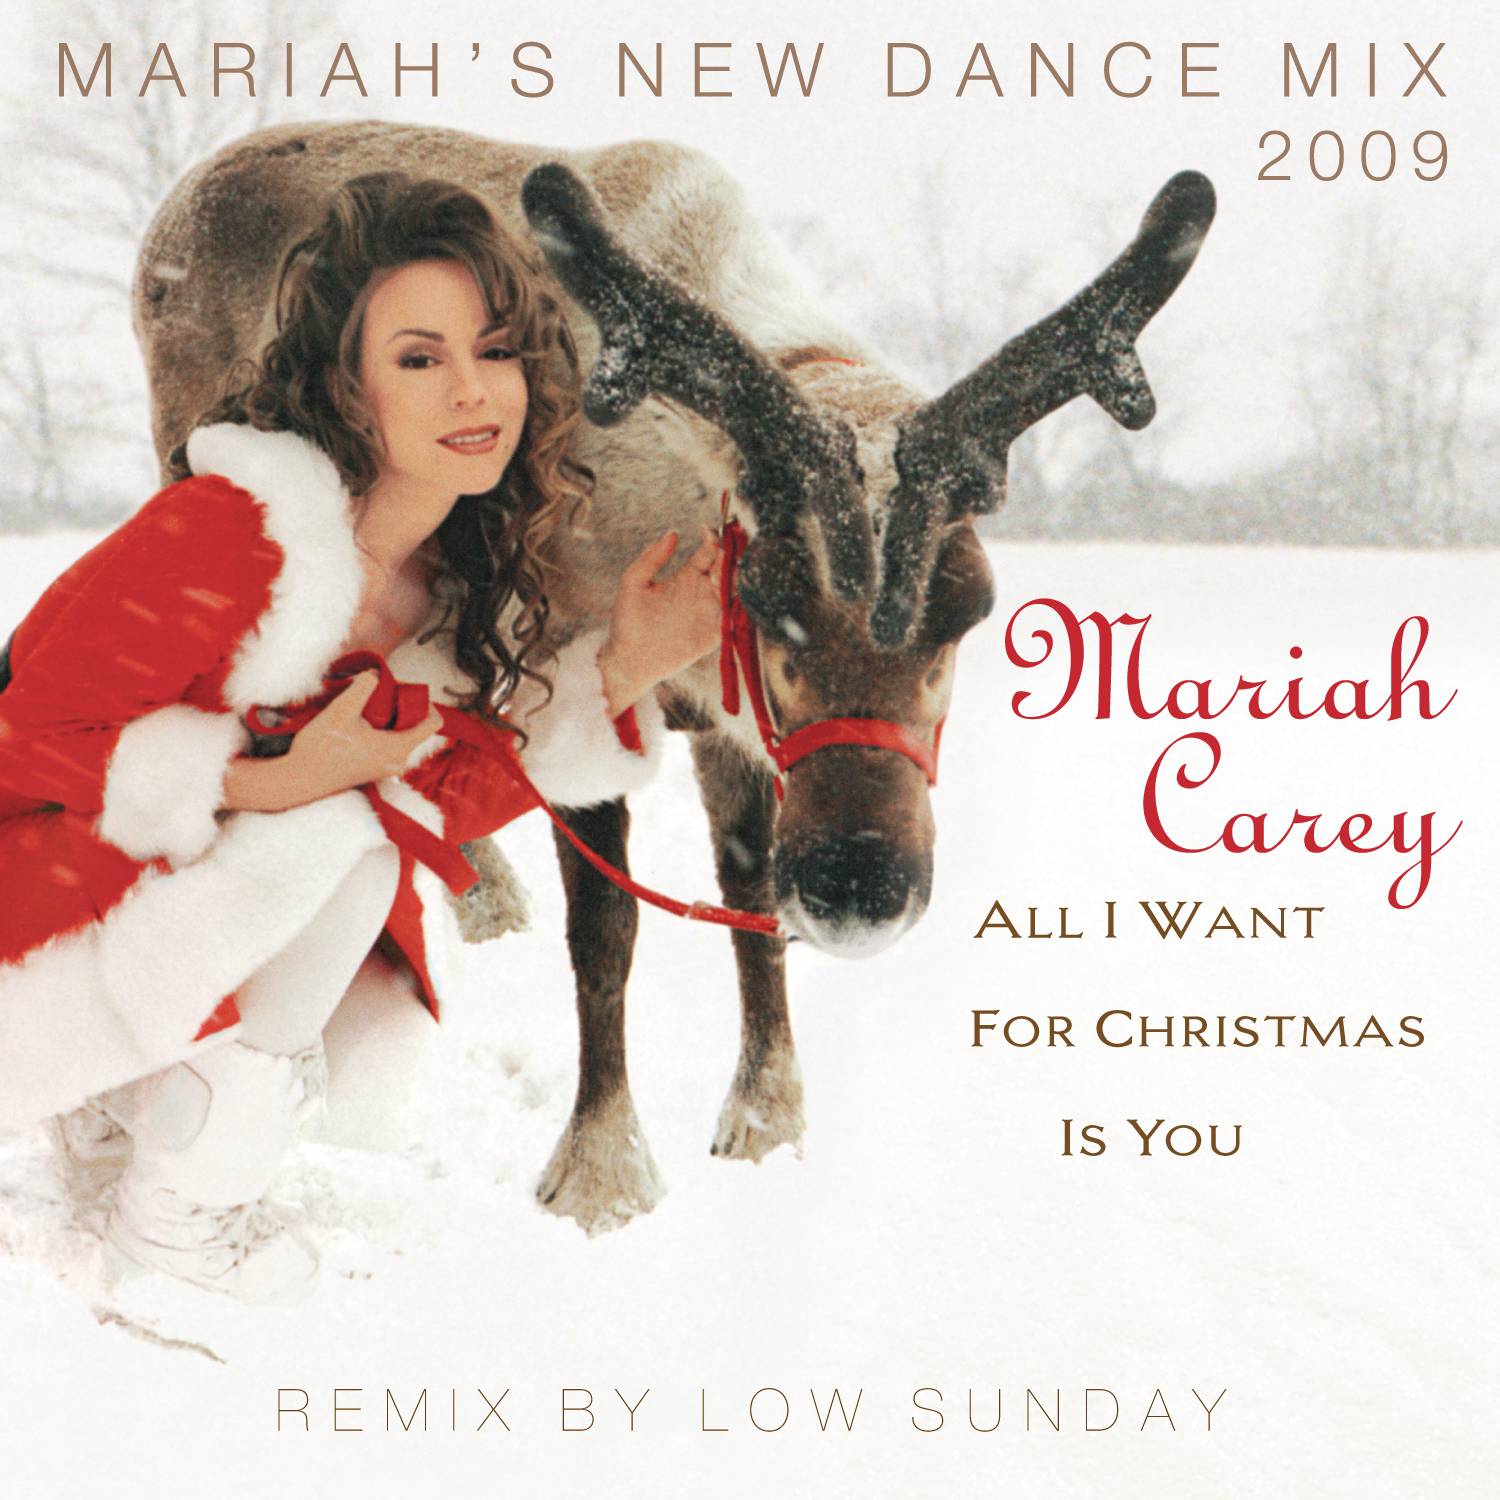 All I Want for Christmas Is You (Mariah's New Dance Mix 2009)